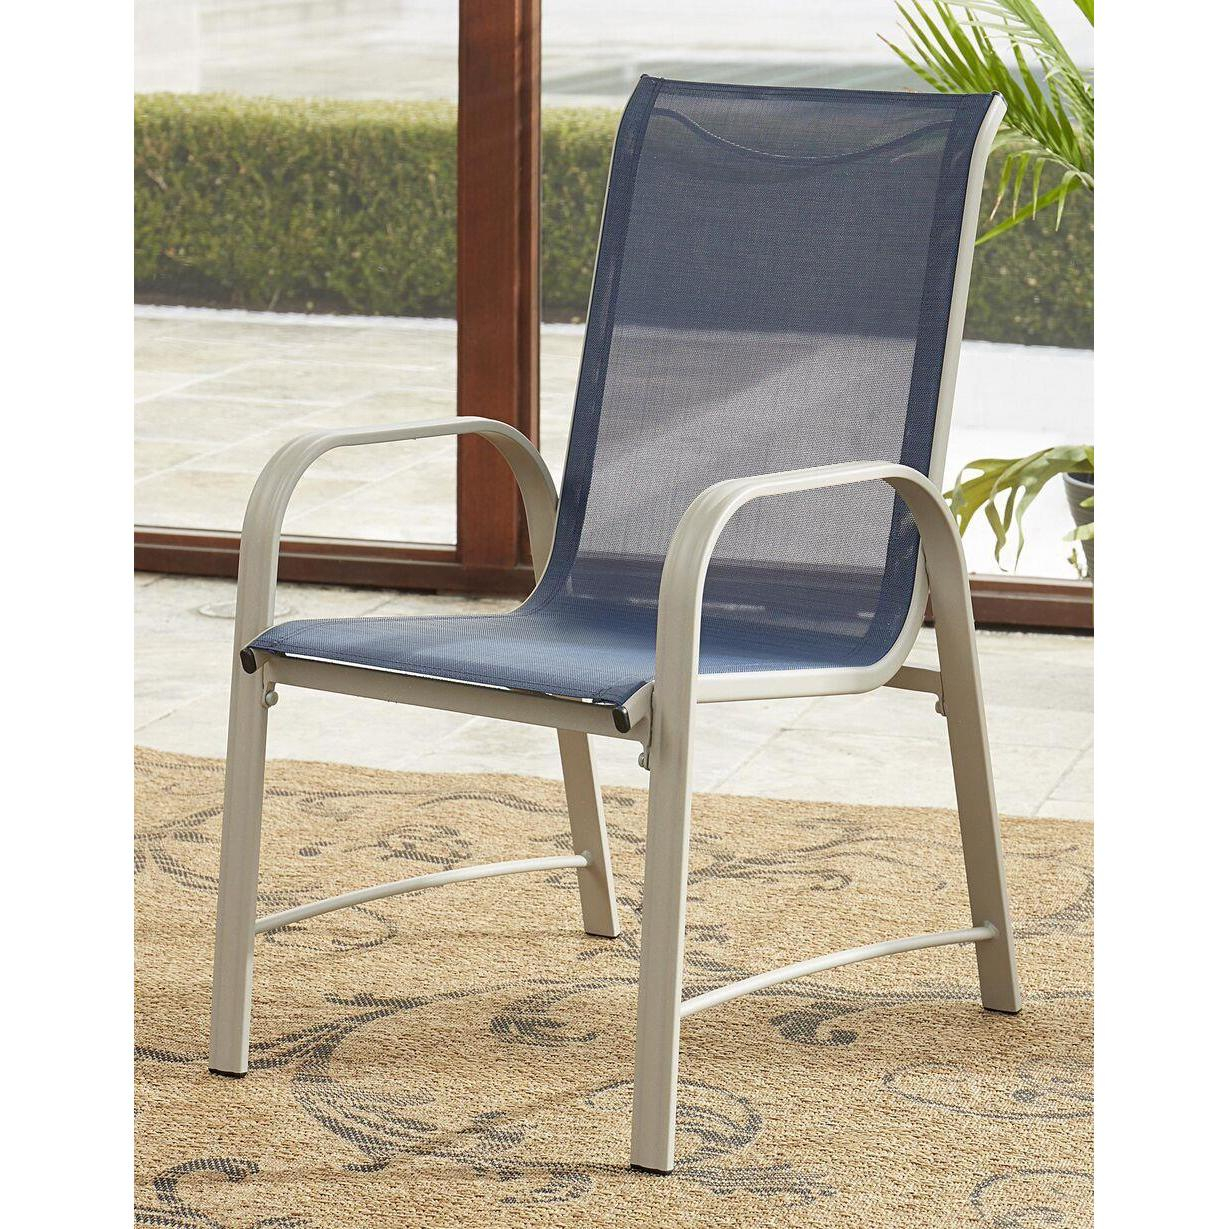 Avenue Greene Grey Navy Outdoor Patio Dining Chairs 6 Pack with regard to dimensions 1229 X 1229